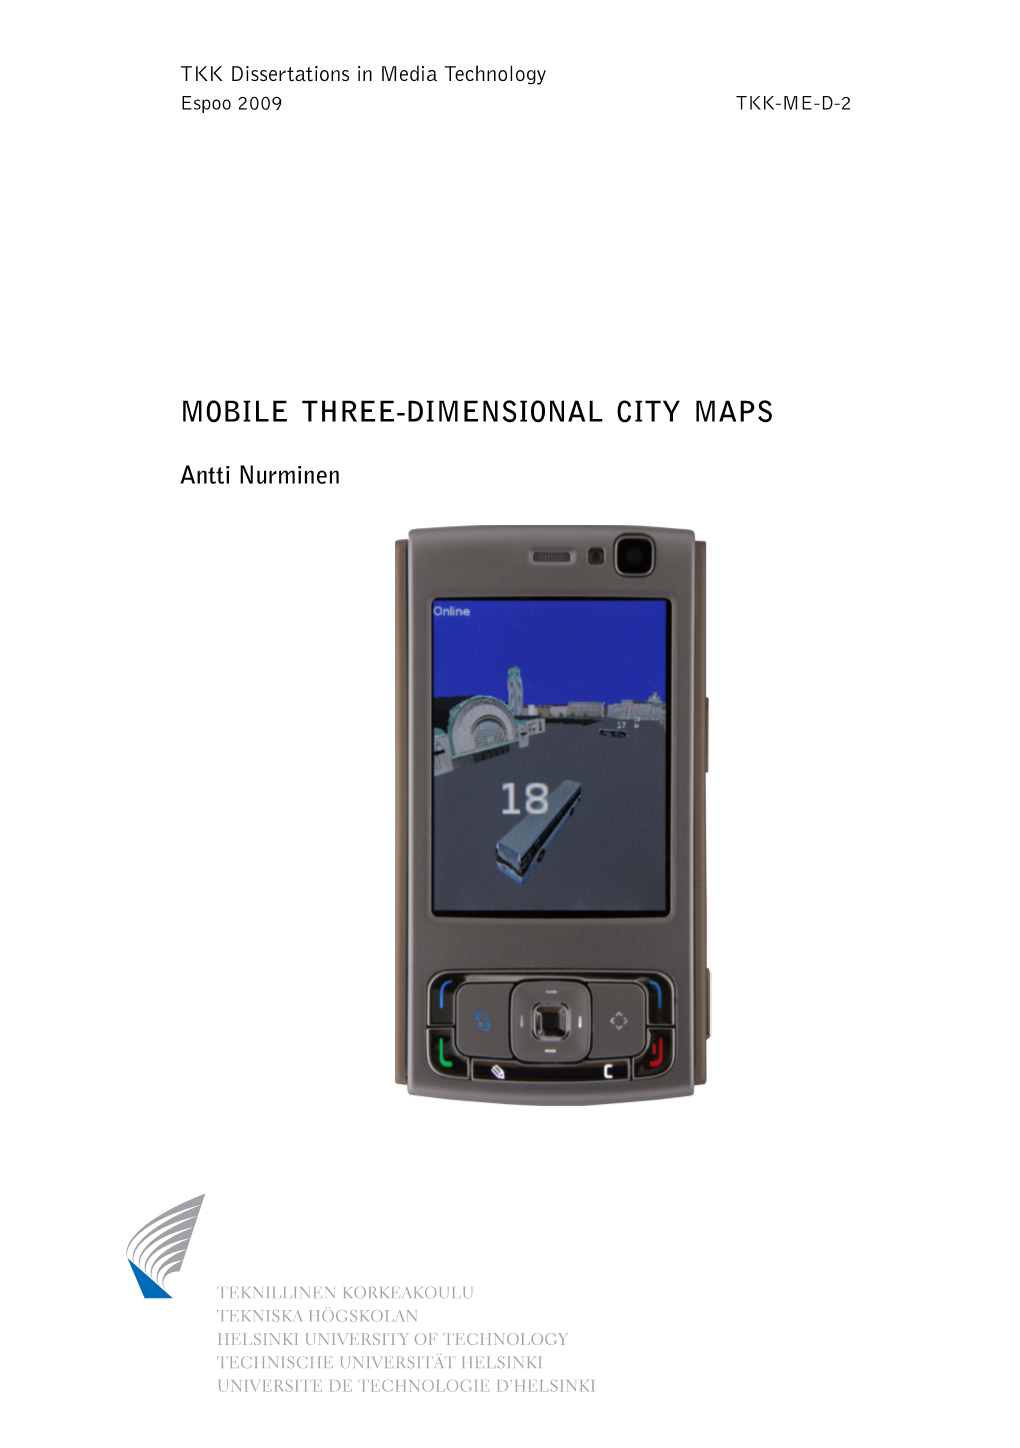 Mobile Three-Dimensional City Maps